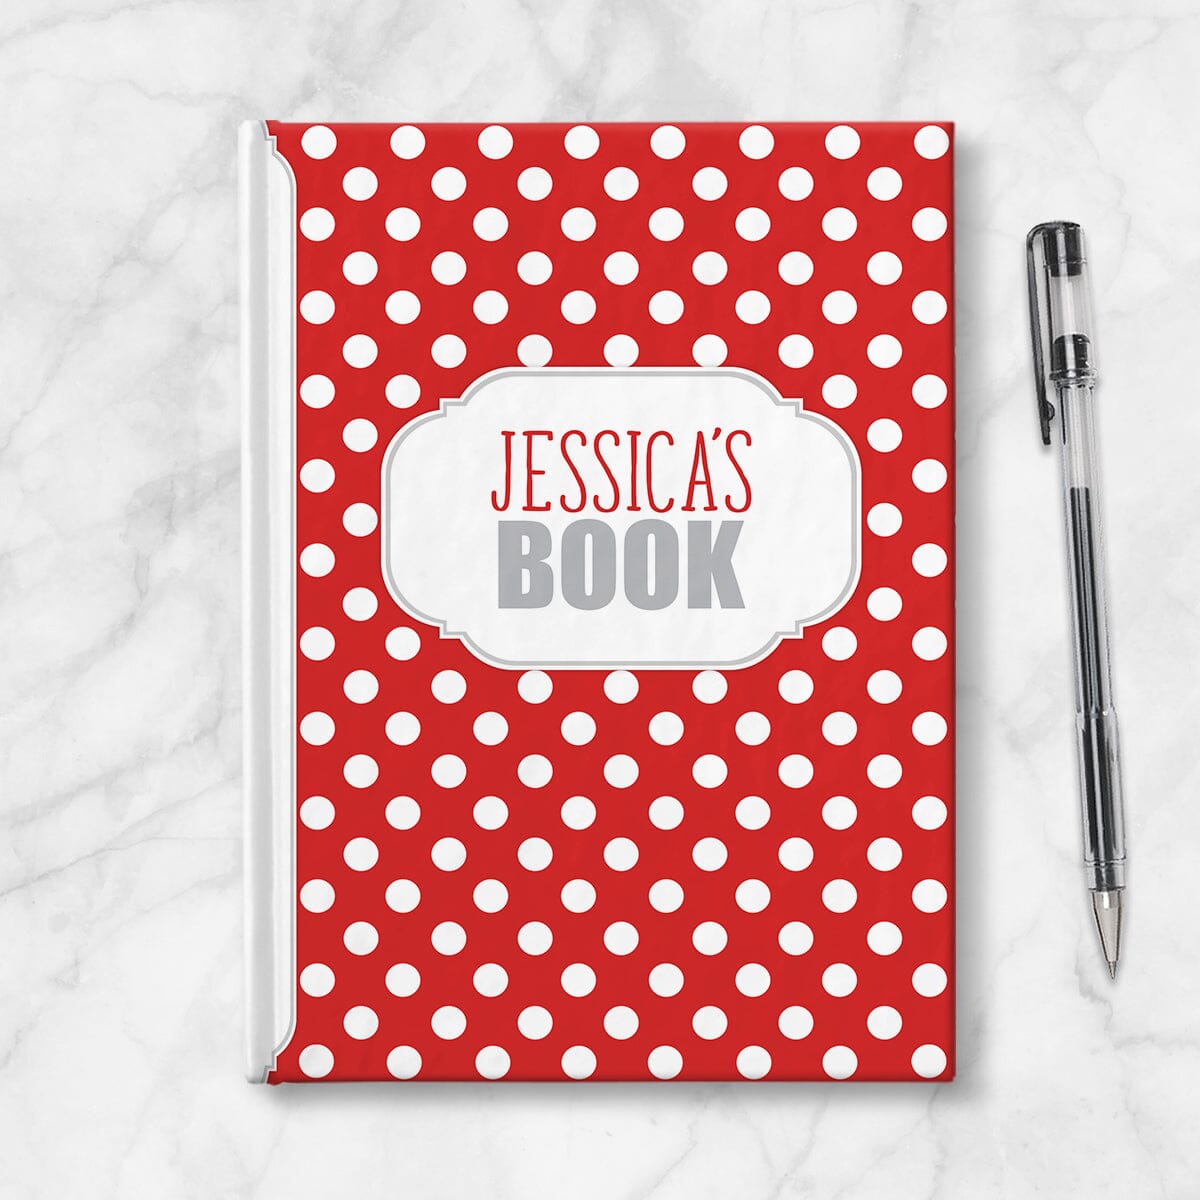 Personalized Red Polka Dot Journal at Artistically Invited. Image shows the book on a countertop next to a pen.